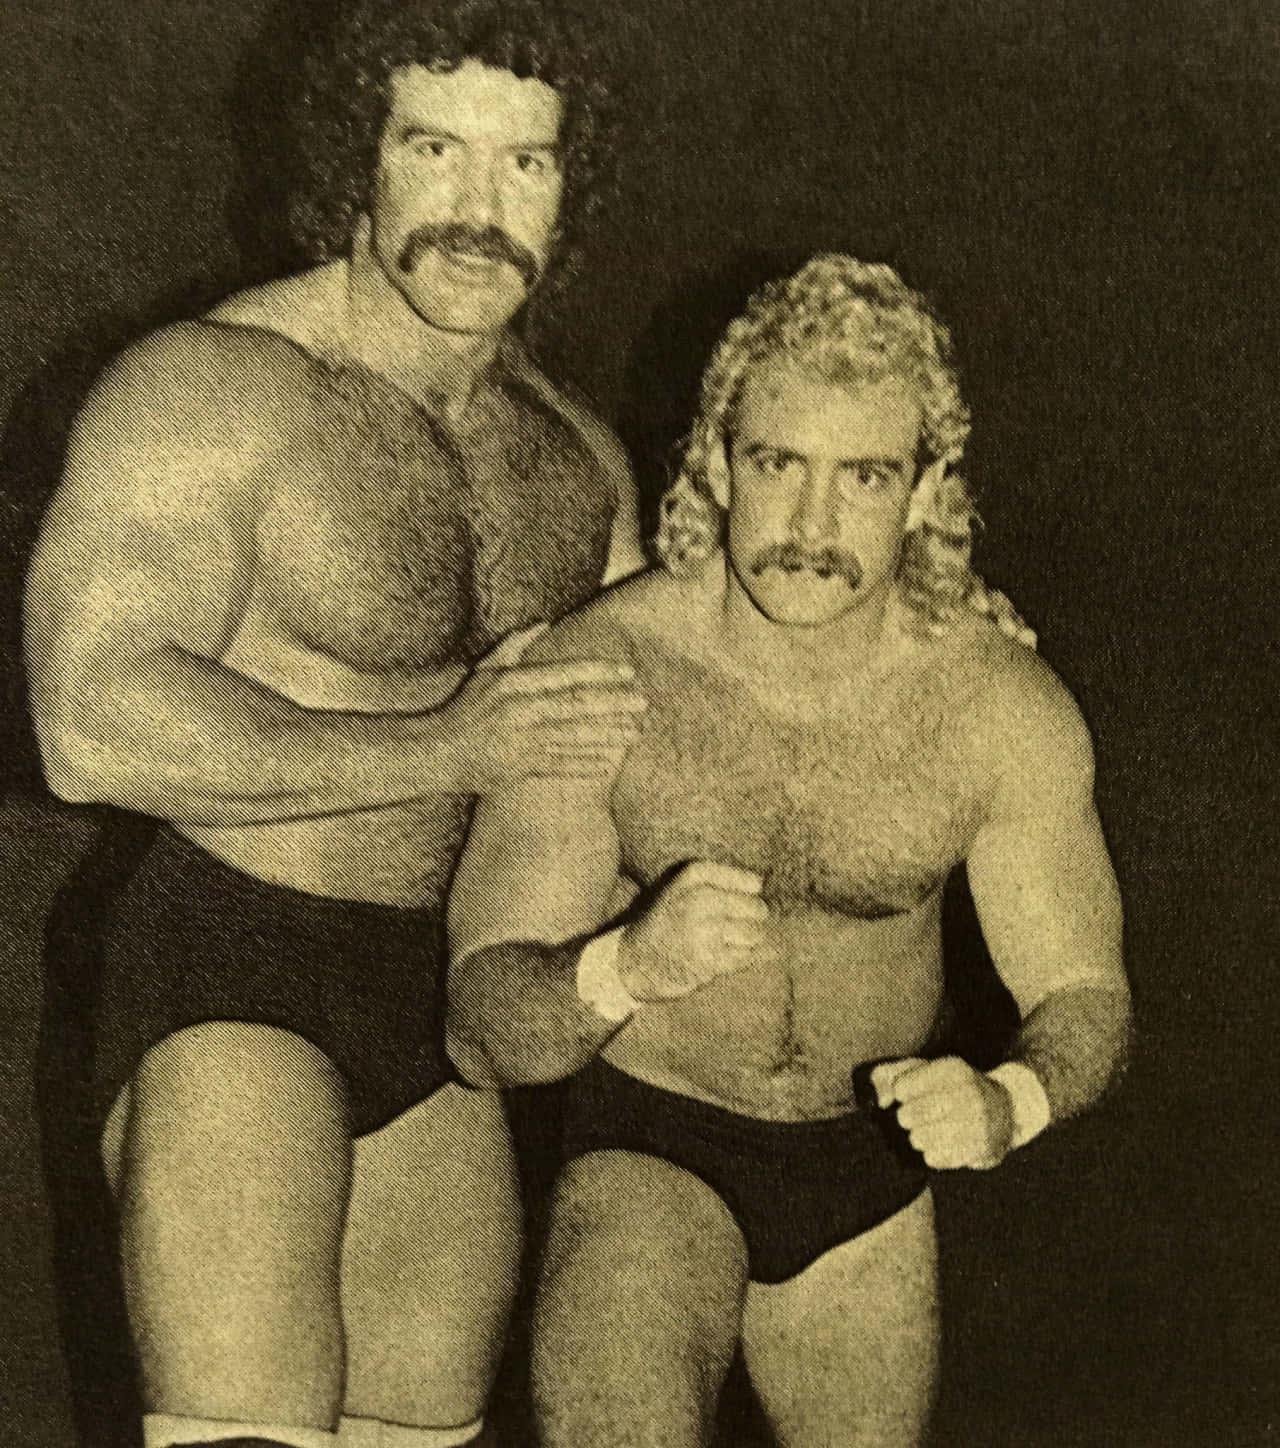 "Legendary American Wrestlers Magnum TA and Scott Hall in action" Wallpaper